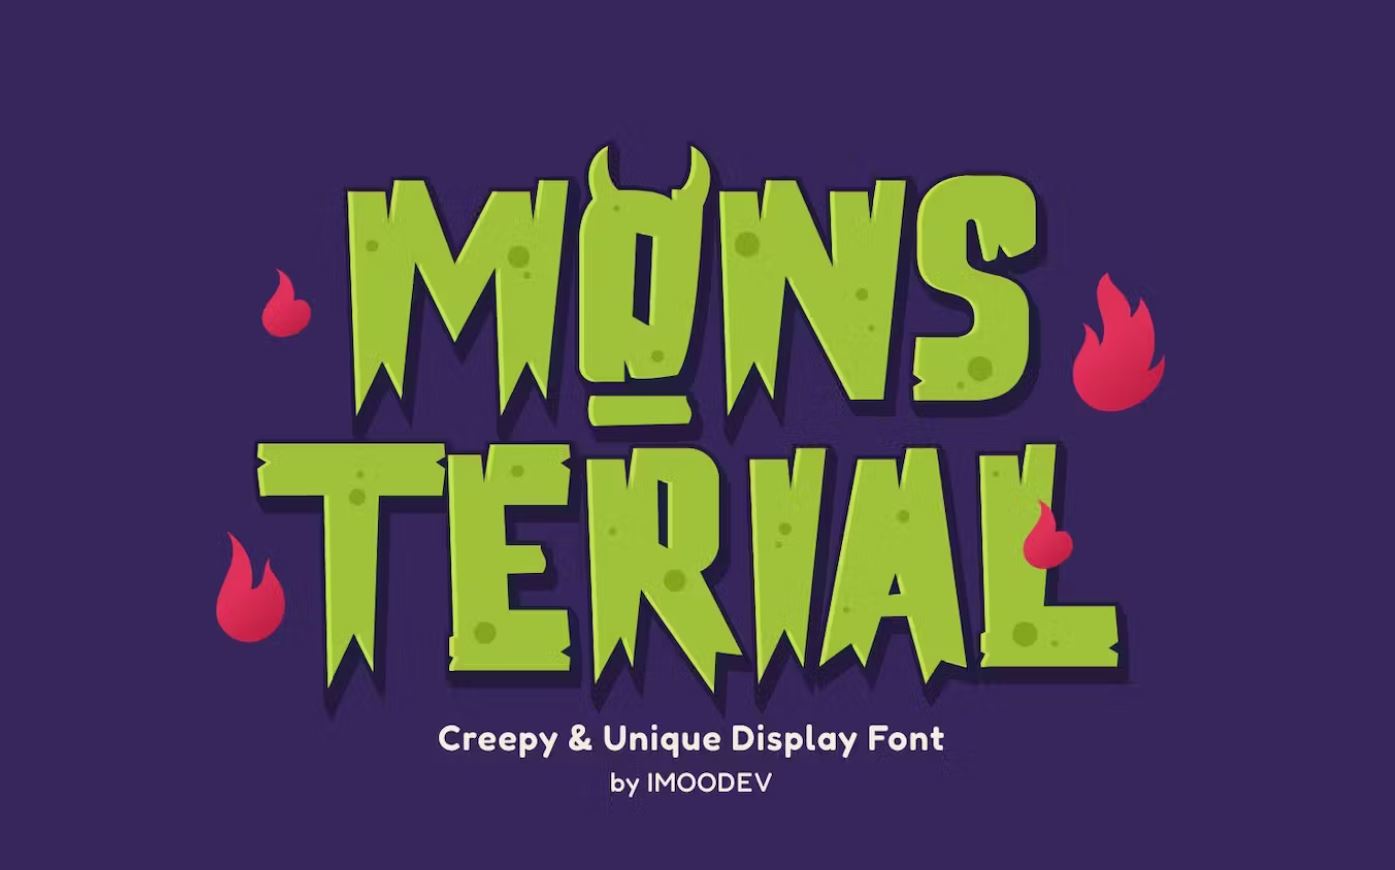 Cute and Creepy Style Font